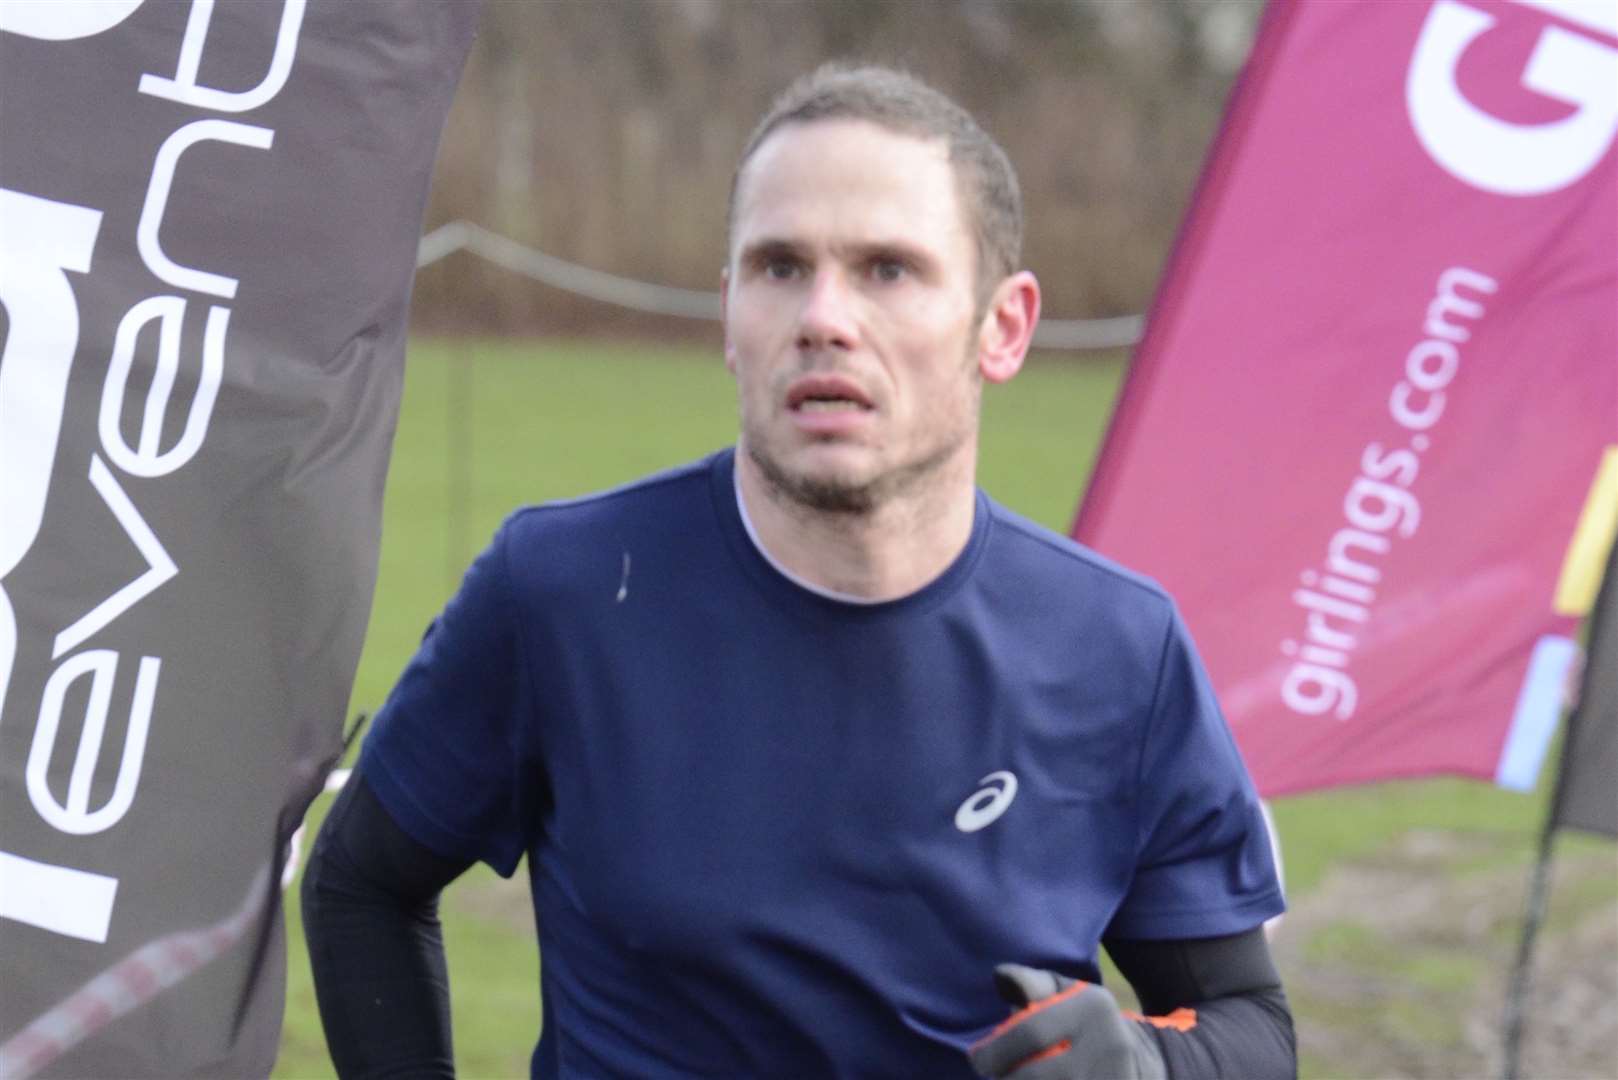 Nick Collins of Ashford AC won the one-hour challenge